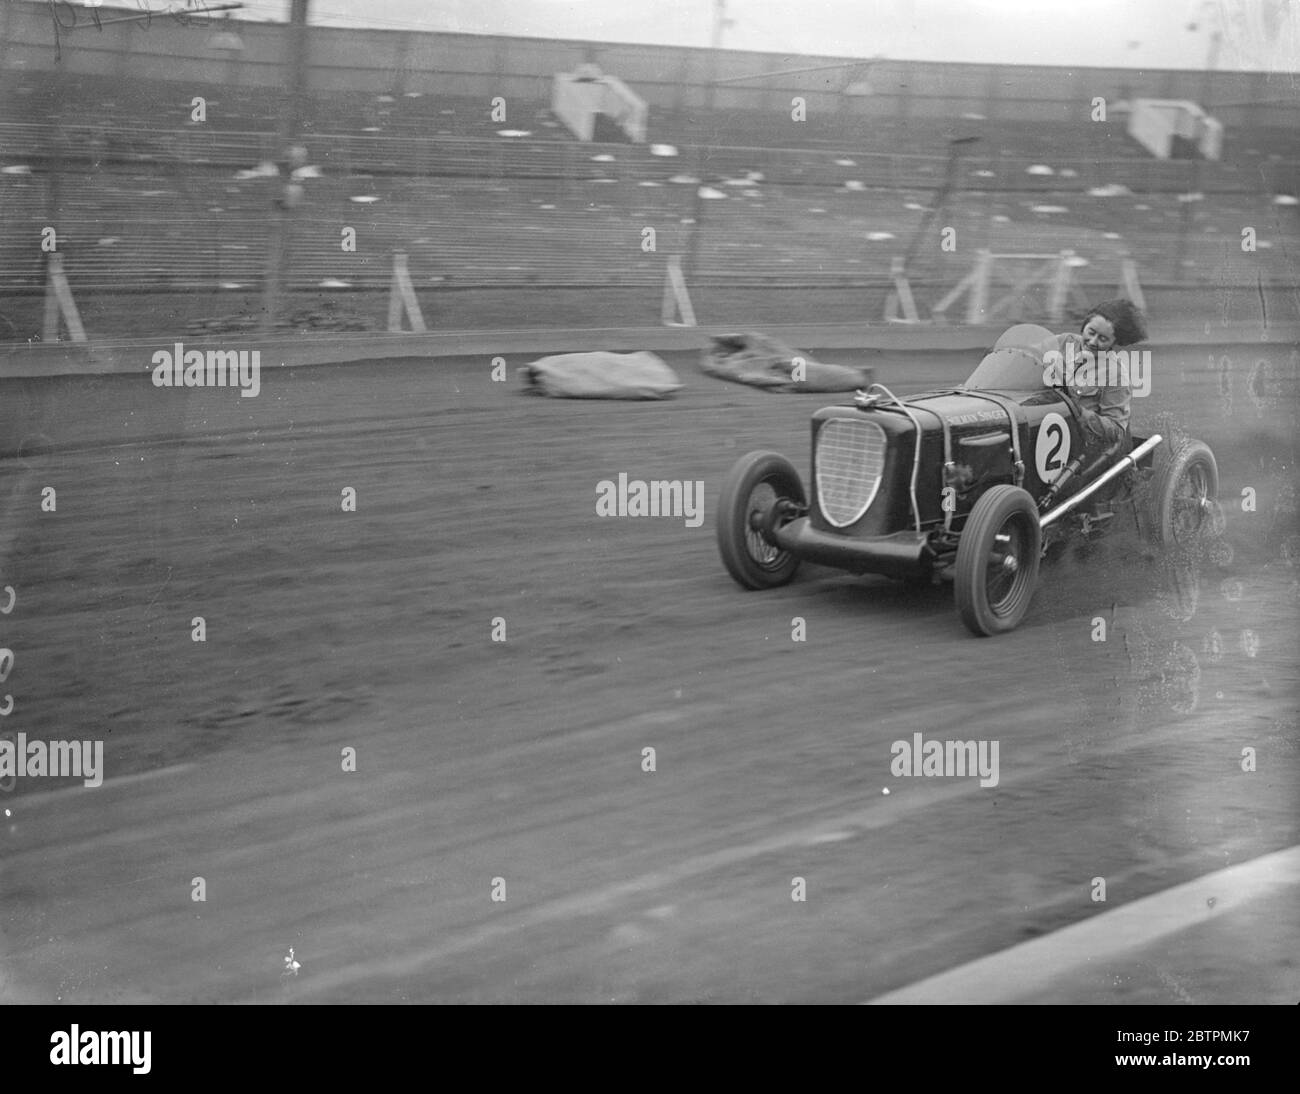 Hair raising . Woman driver takes up midget car racing . Fay Taylor , well known racing driver and once holder of the women ' s speedway championship , is now taking up midget car racing . She will compete all over the country . Photo shows , Fay Taylor ' s hair blowing in the wind as she hurtles round track in a practice run at West Ham Stadium . 19 August 1936 Stock Photo